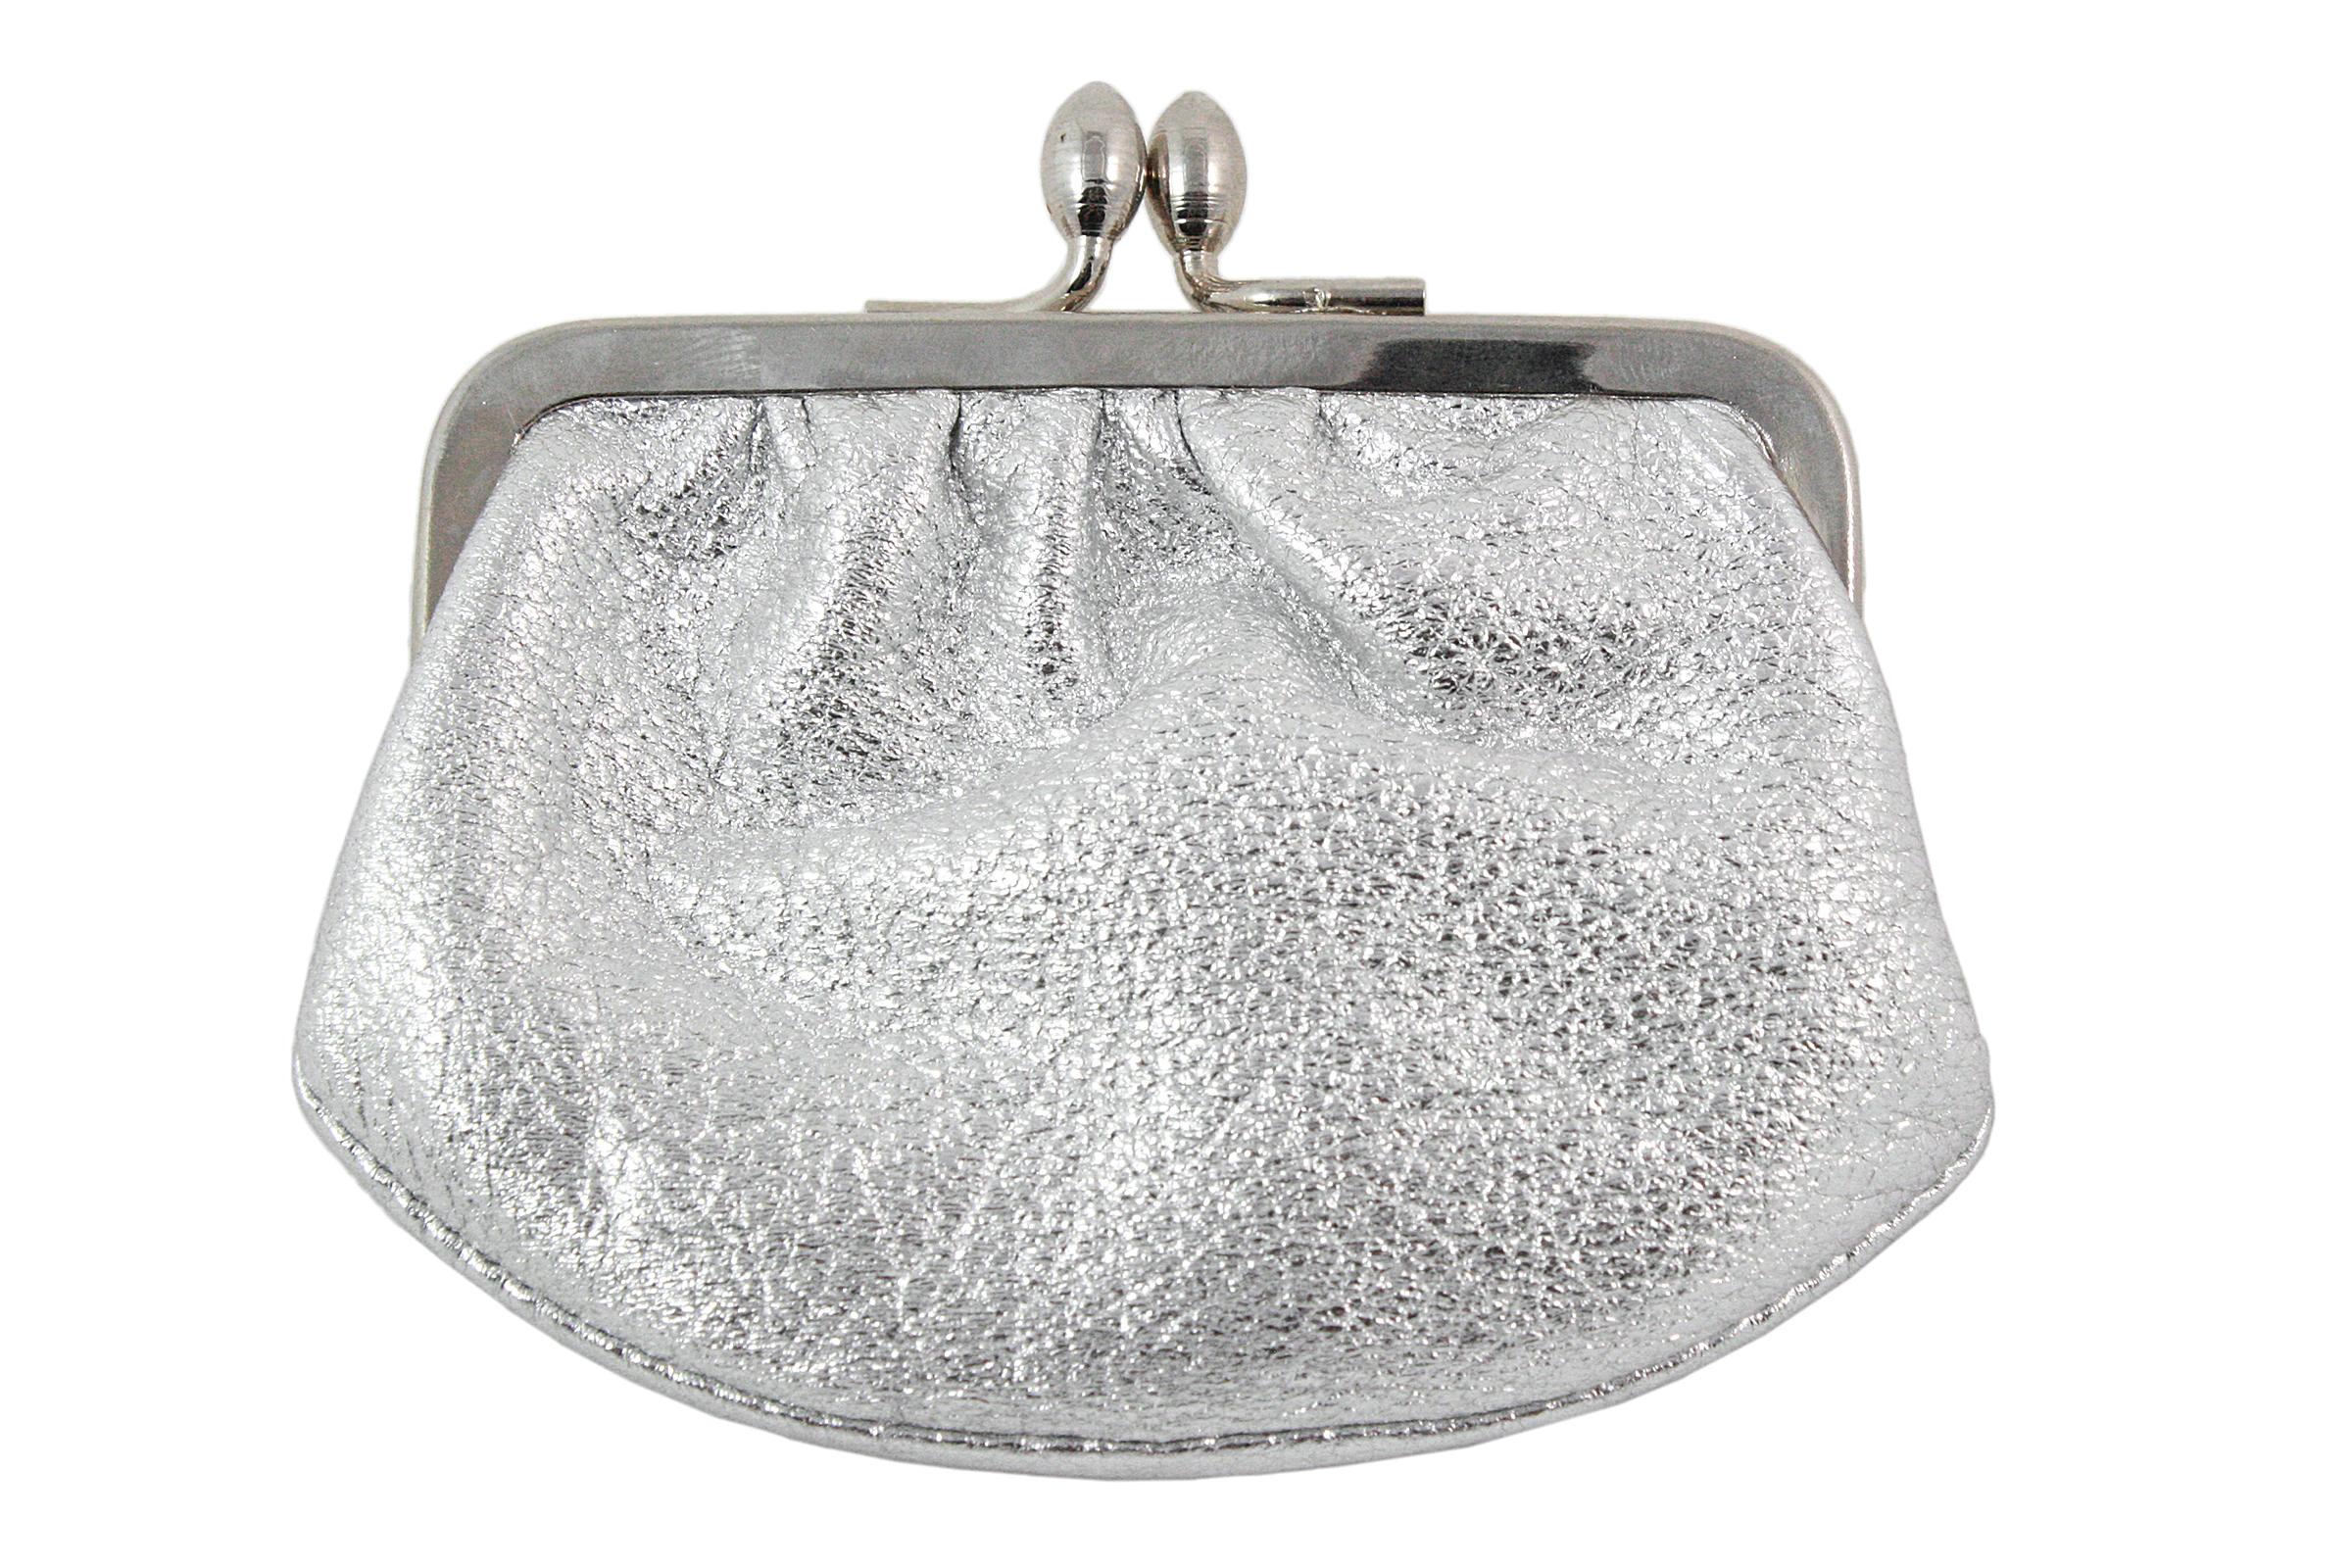  Judith Leiber Clear and Green Rhinestone Clutch For Sale 4